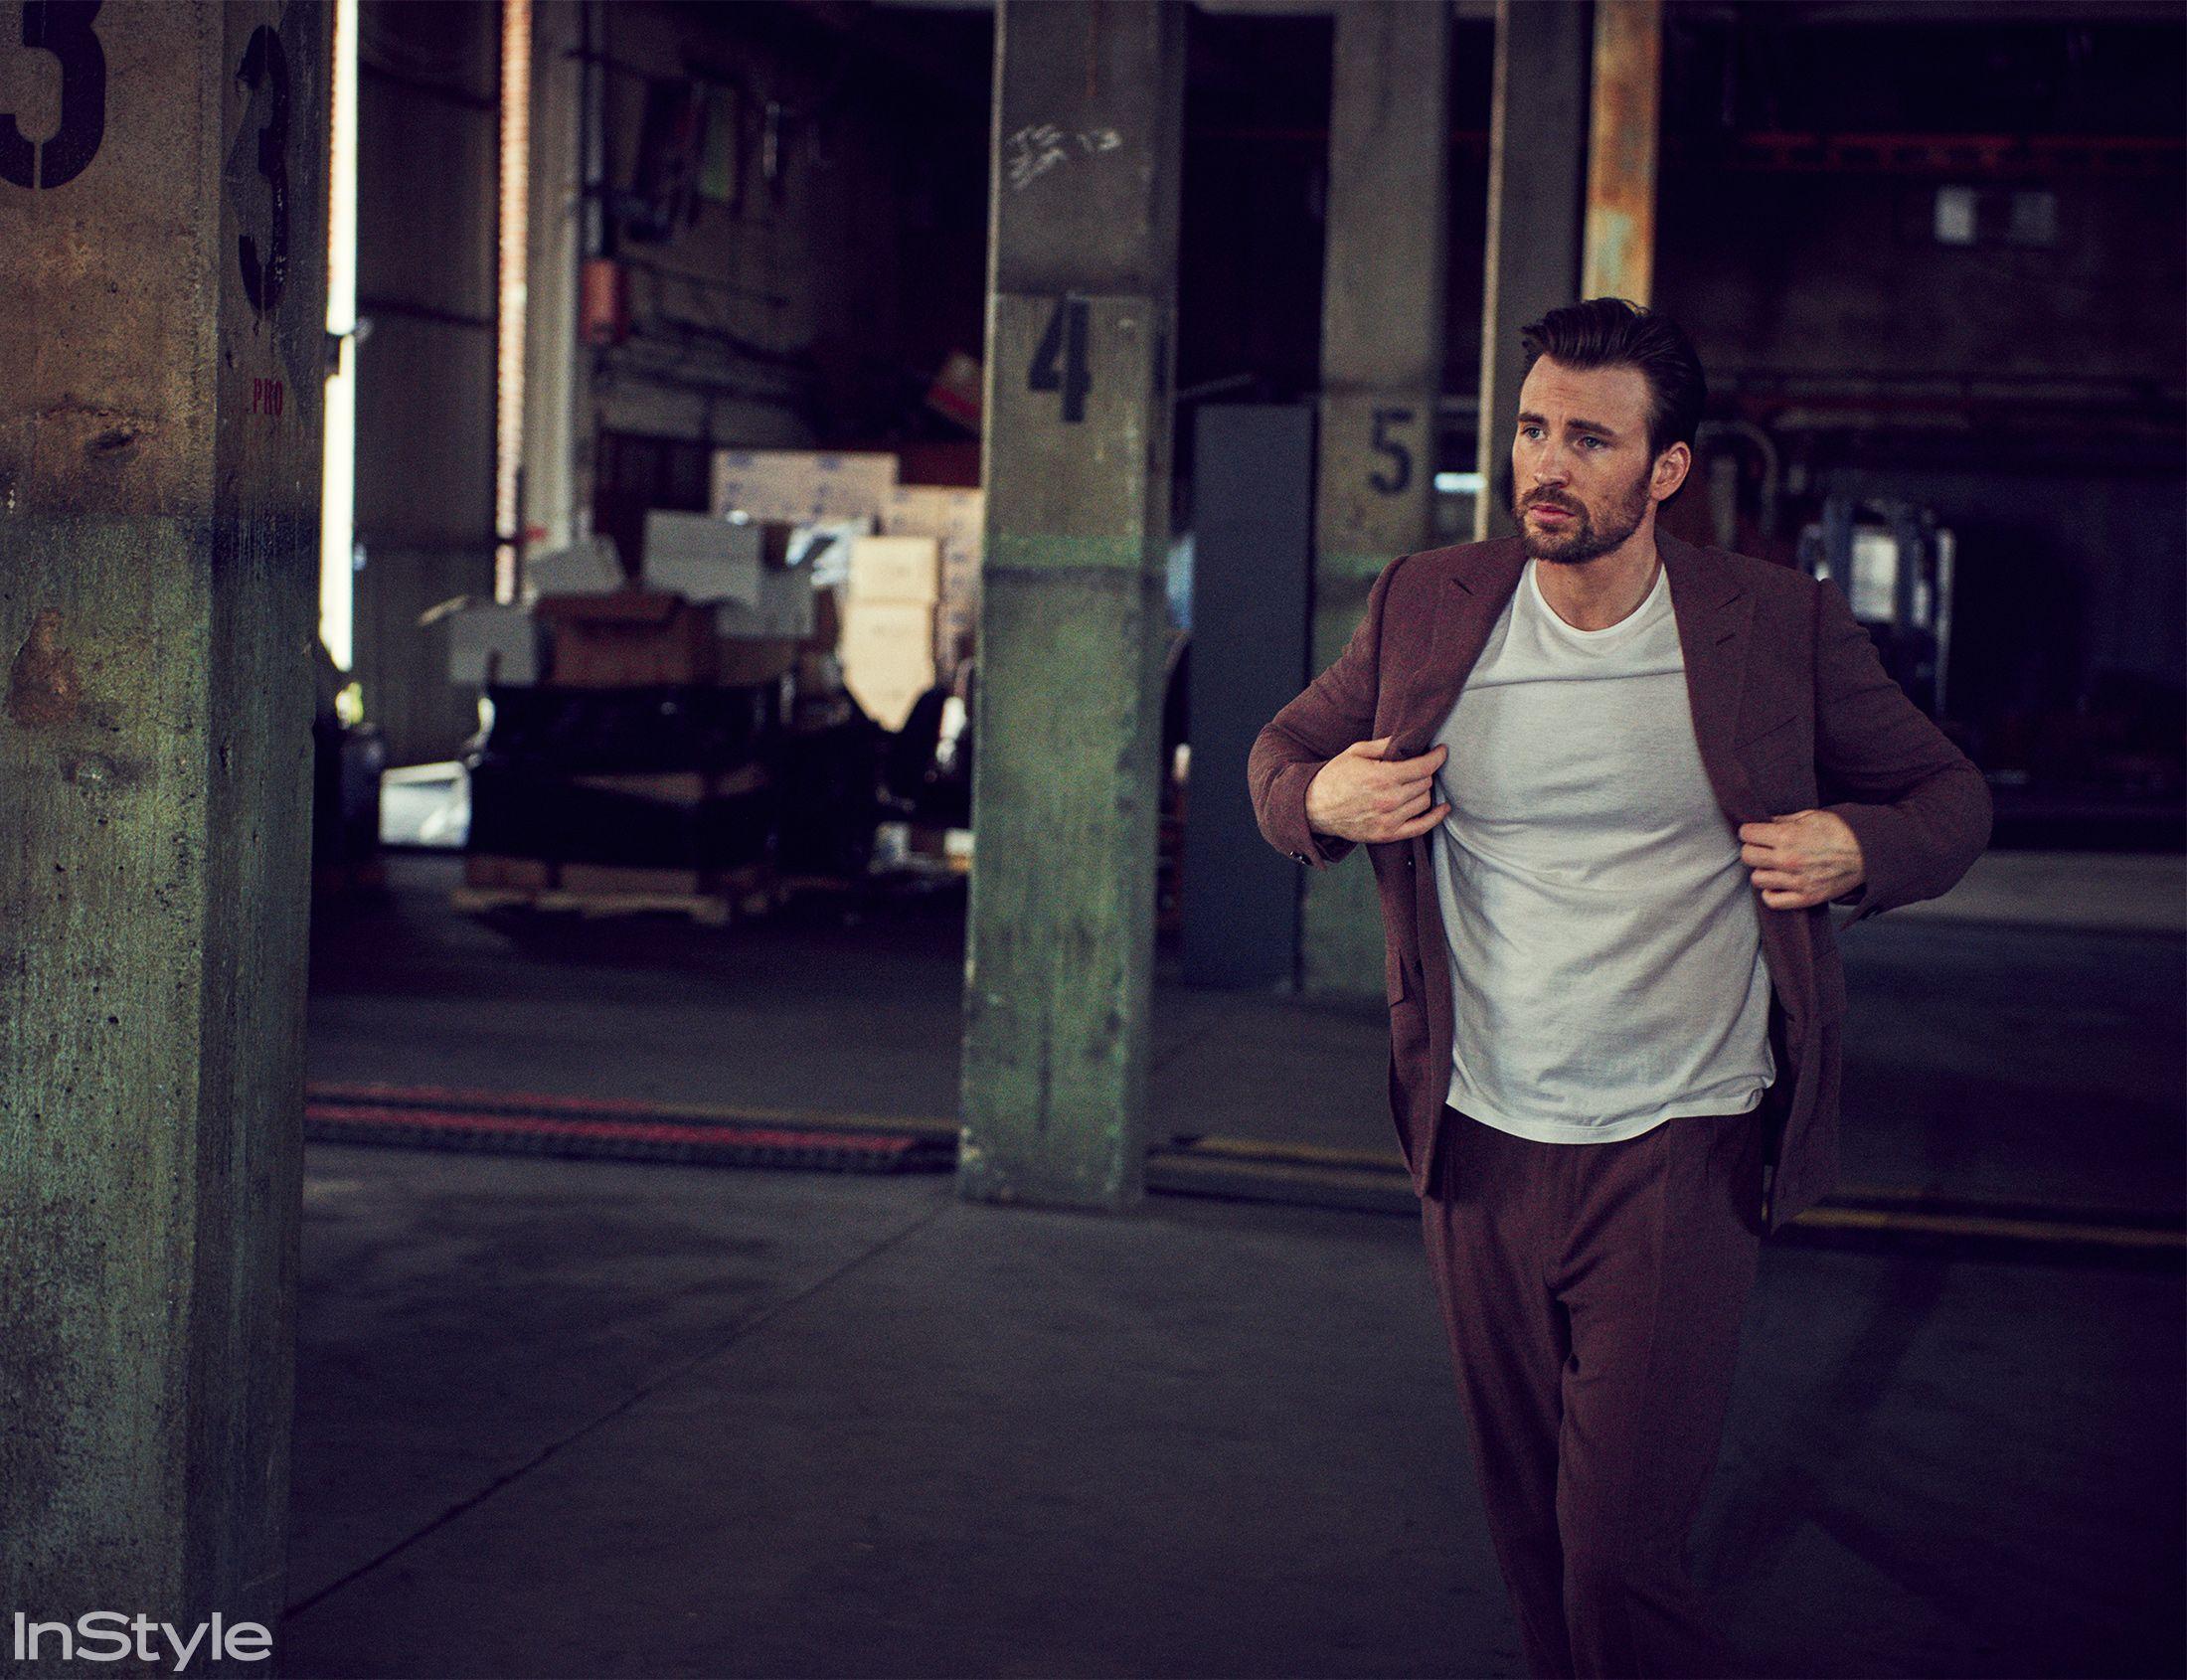 See Exclusive Smoldering Photo of Captain America's Chris Evans